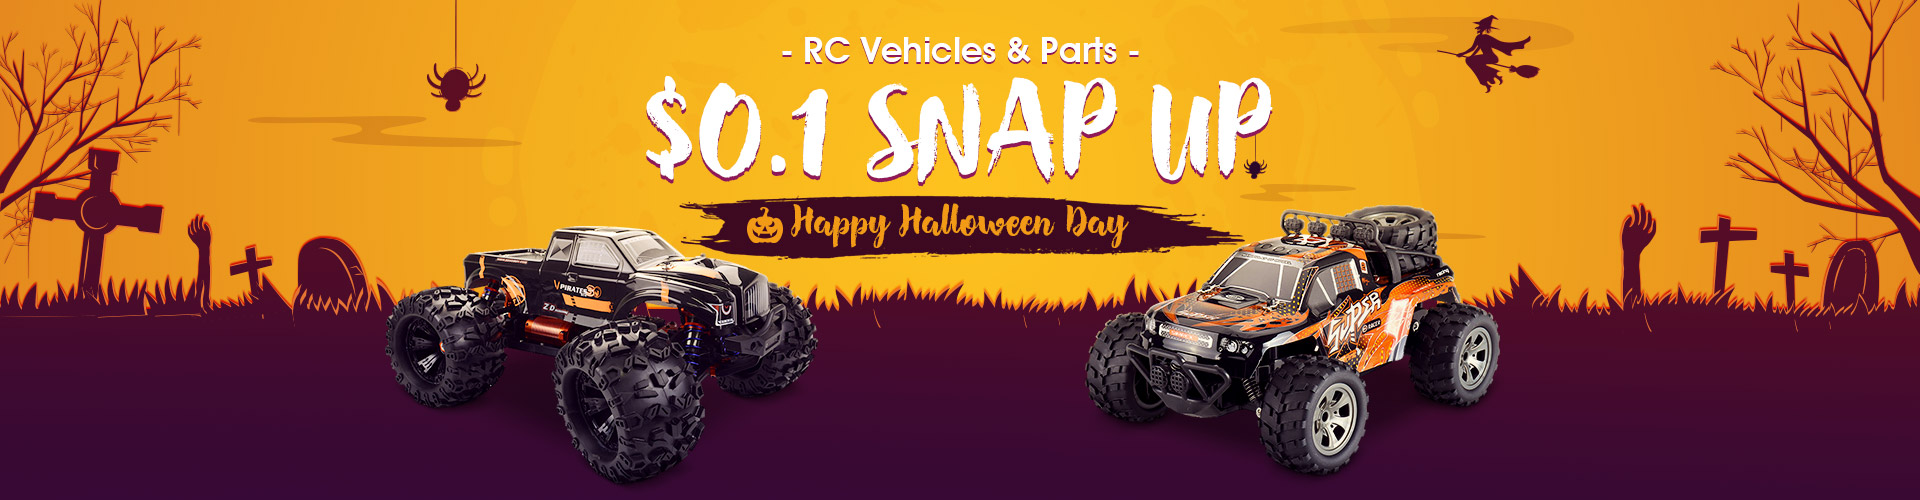 Halloween Day Sale for RC Vehicles Parts